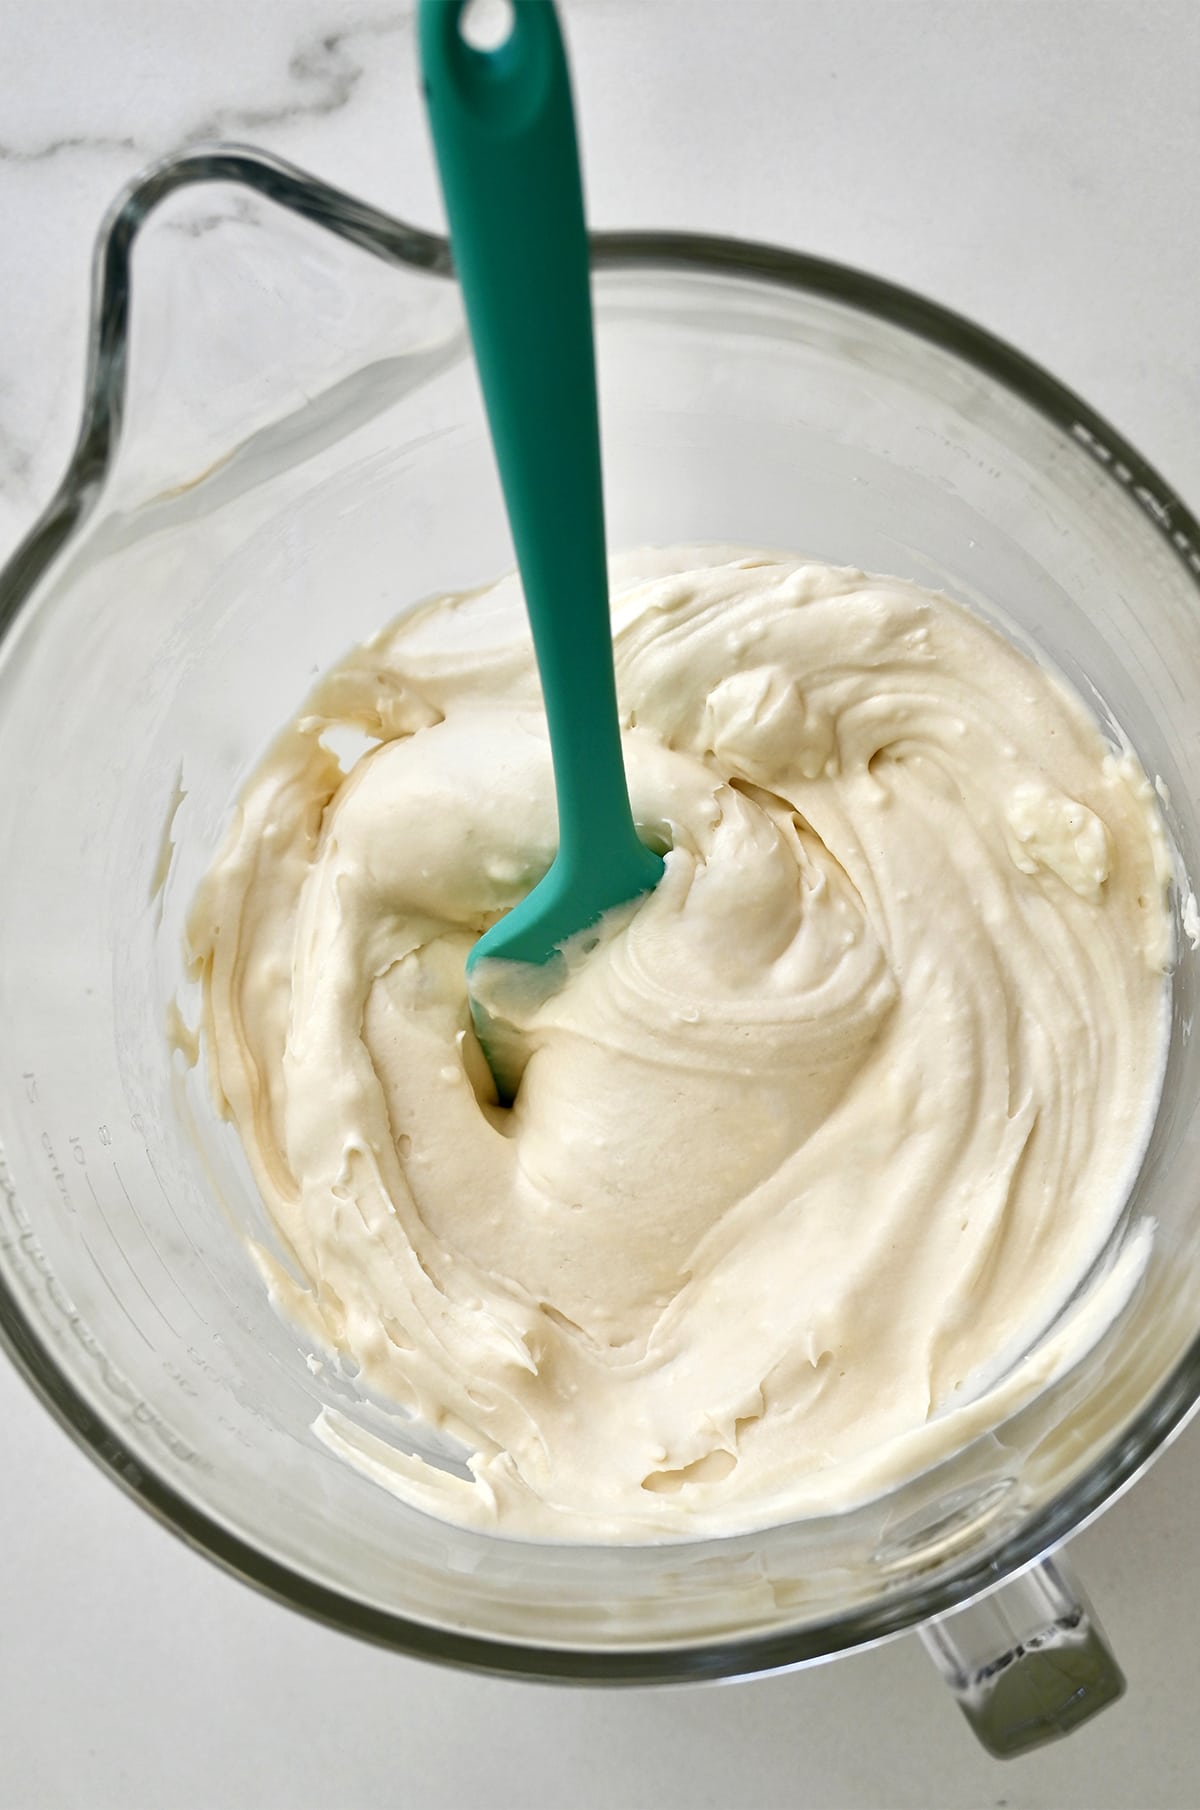 Fluffy cream cheese frosting is in a glass stand mixer bowl, with a teal spatula.